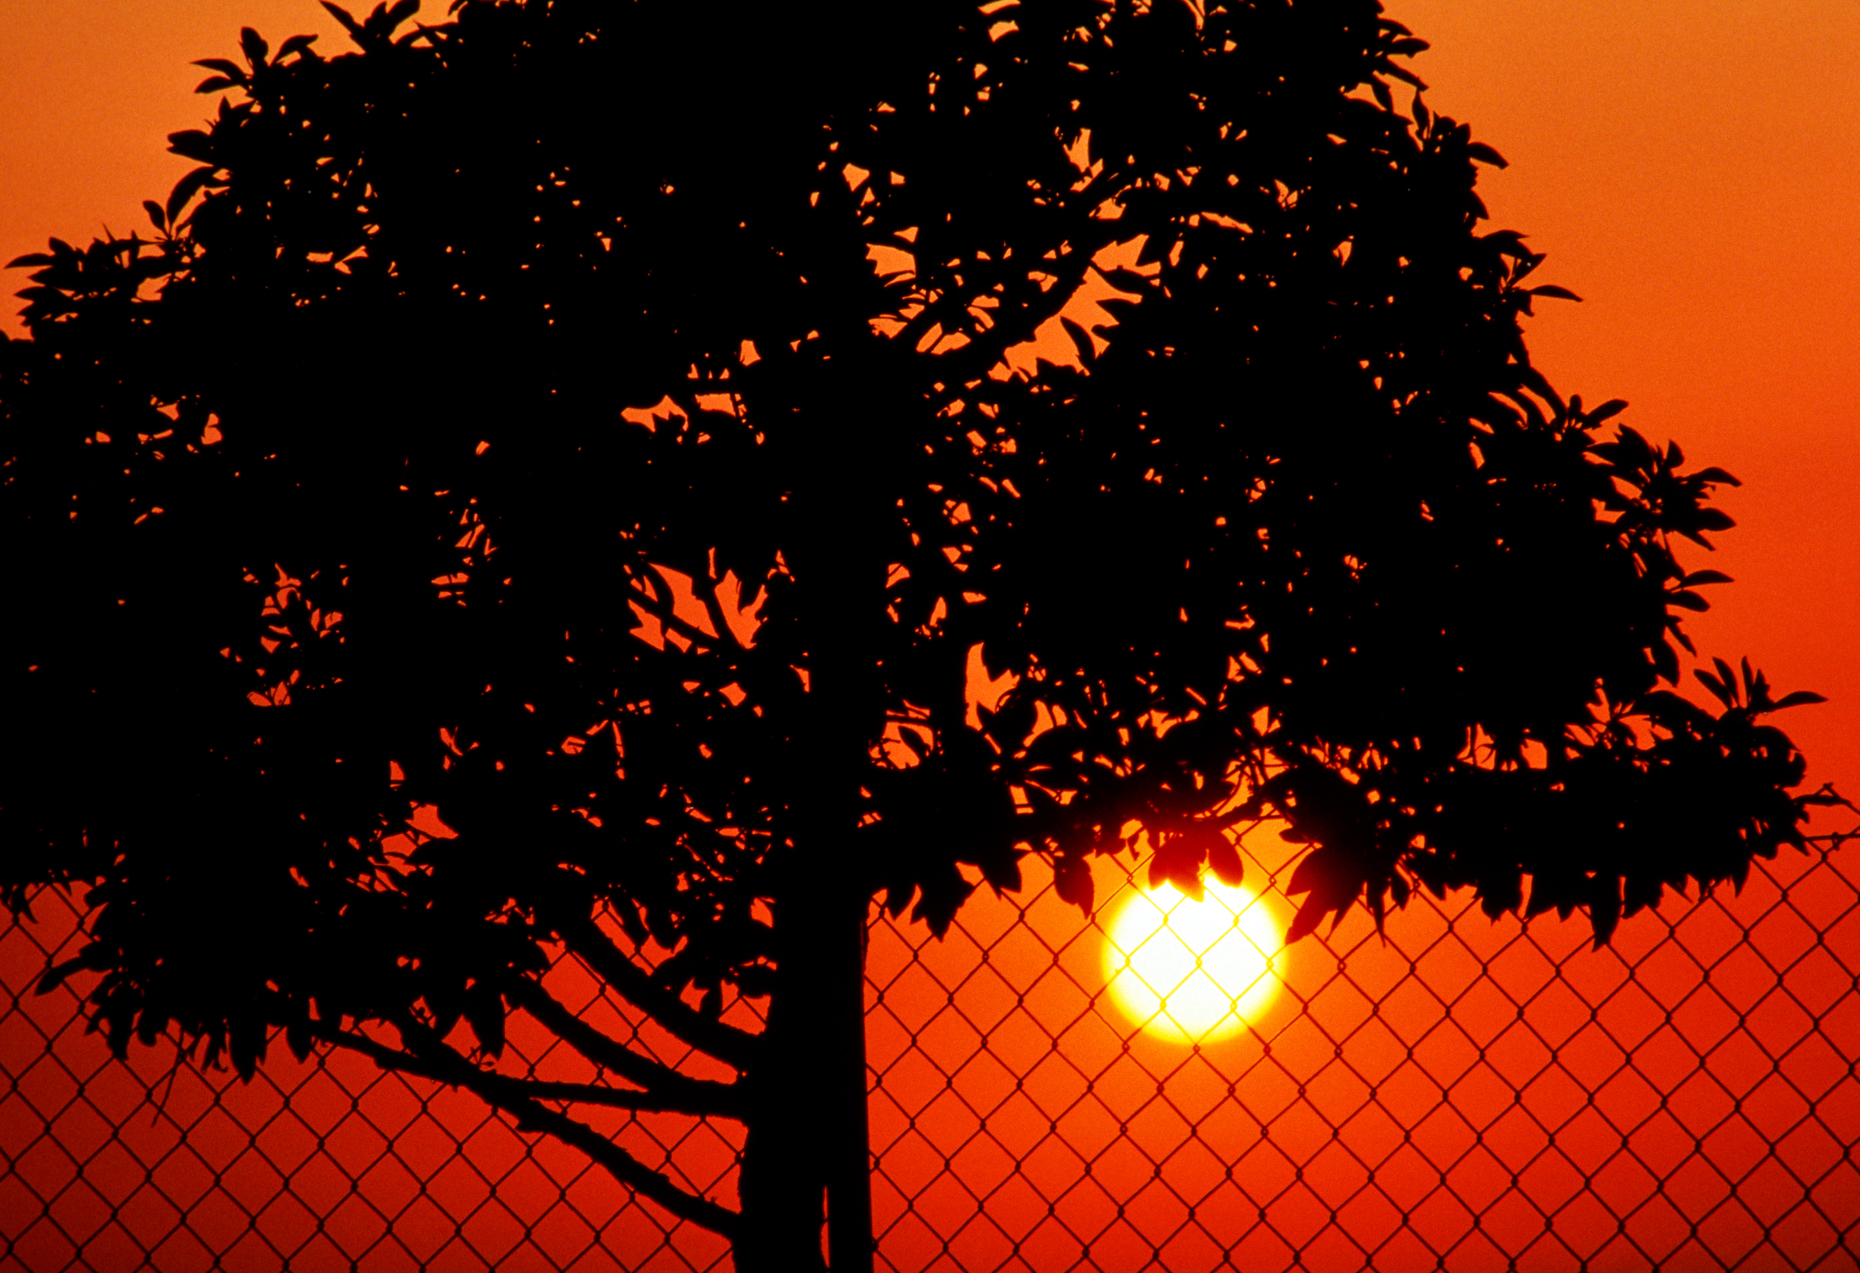 Abstract silhouette view of fence & tree against setting sun and